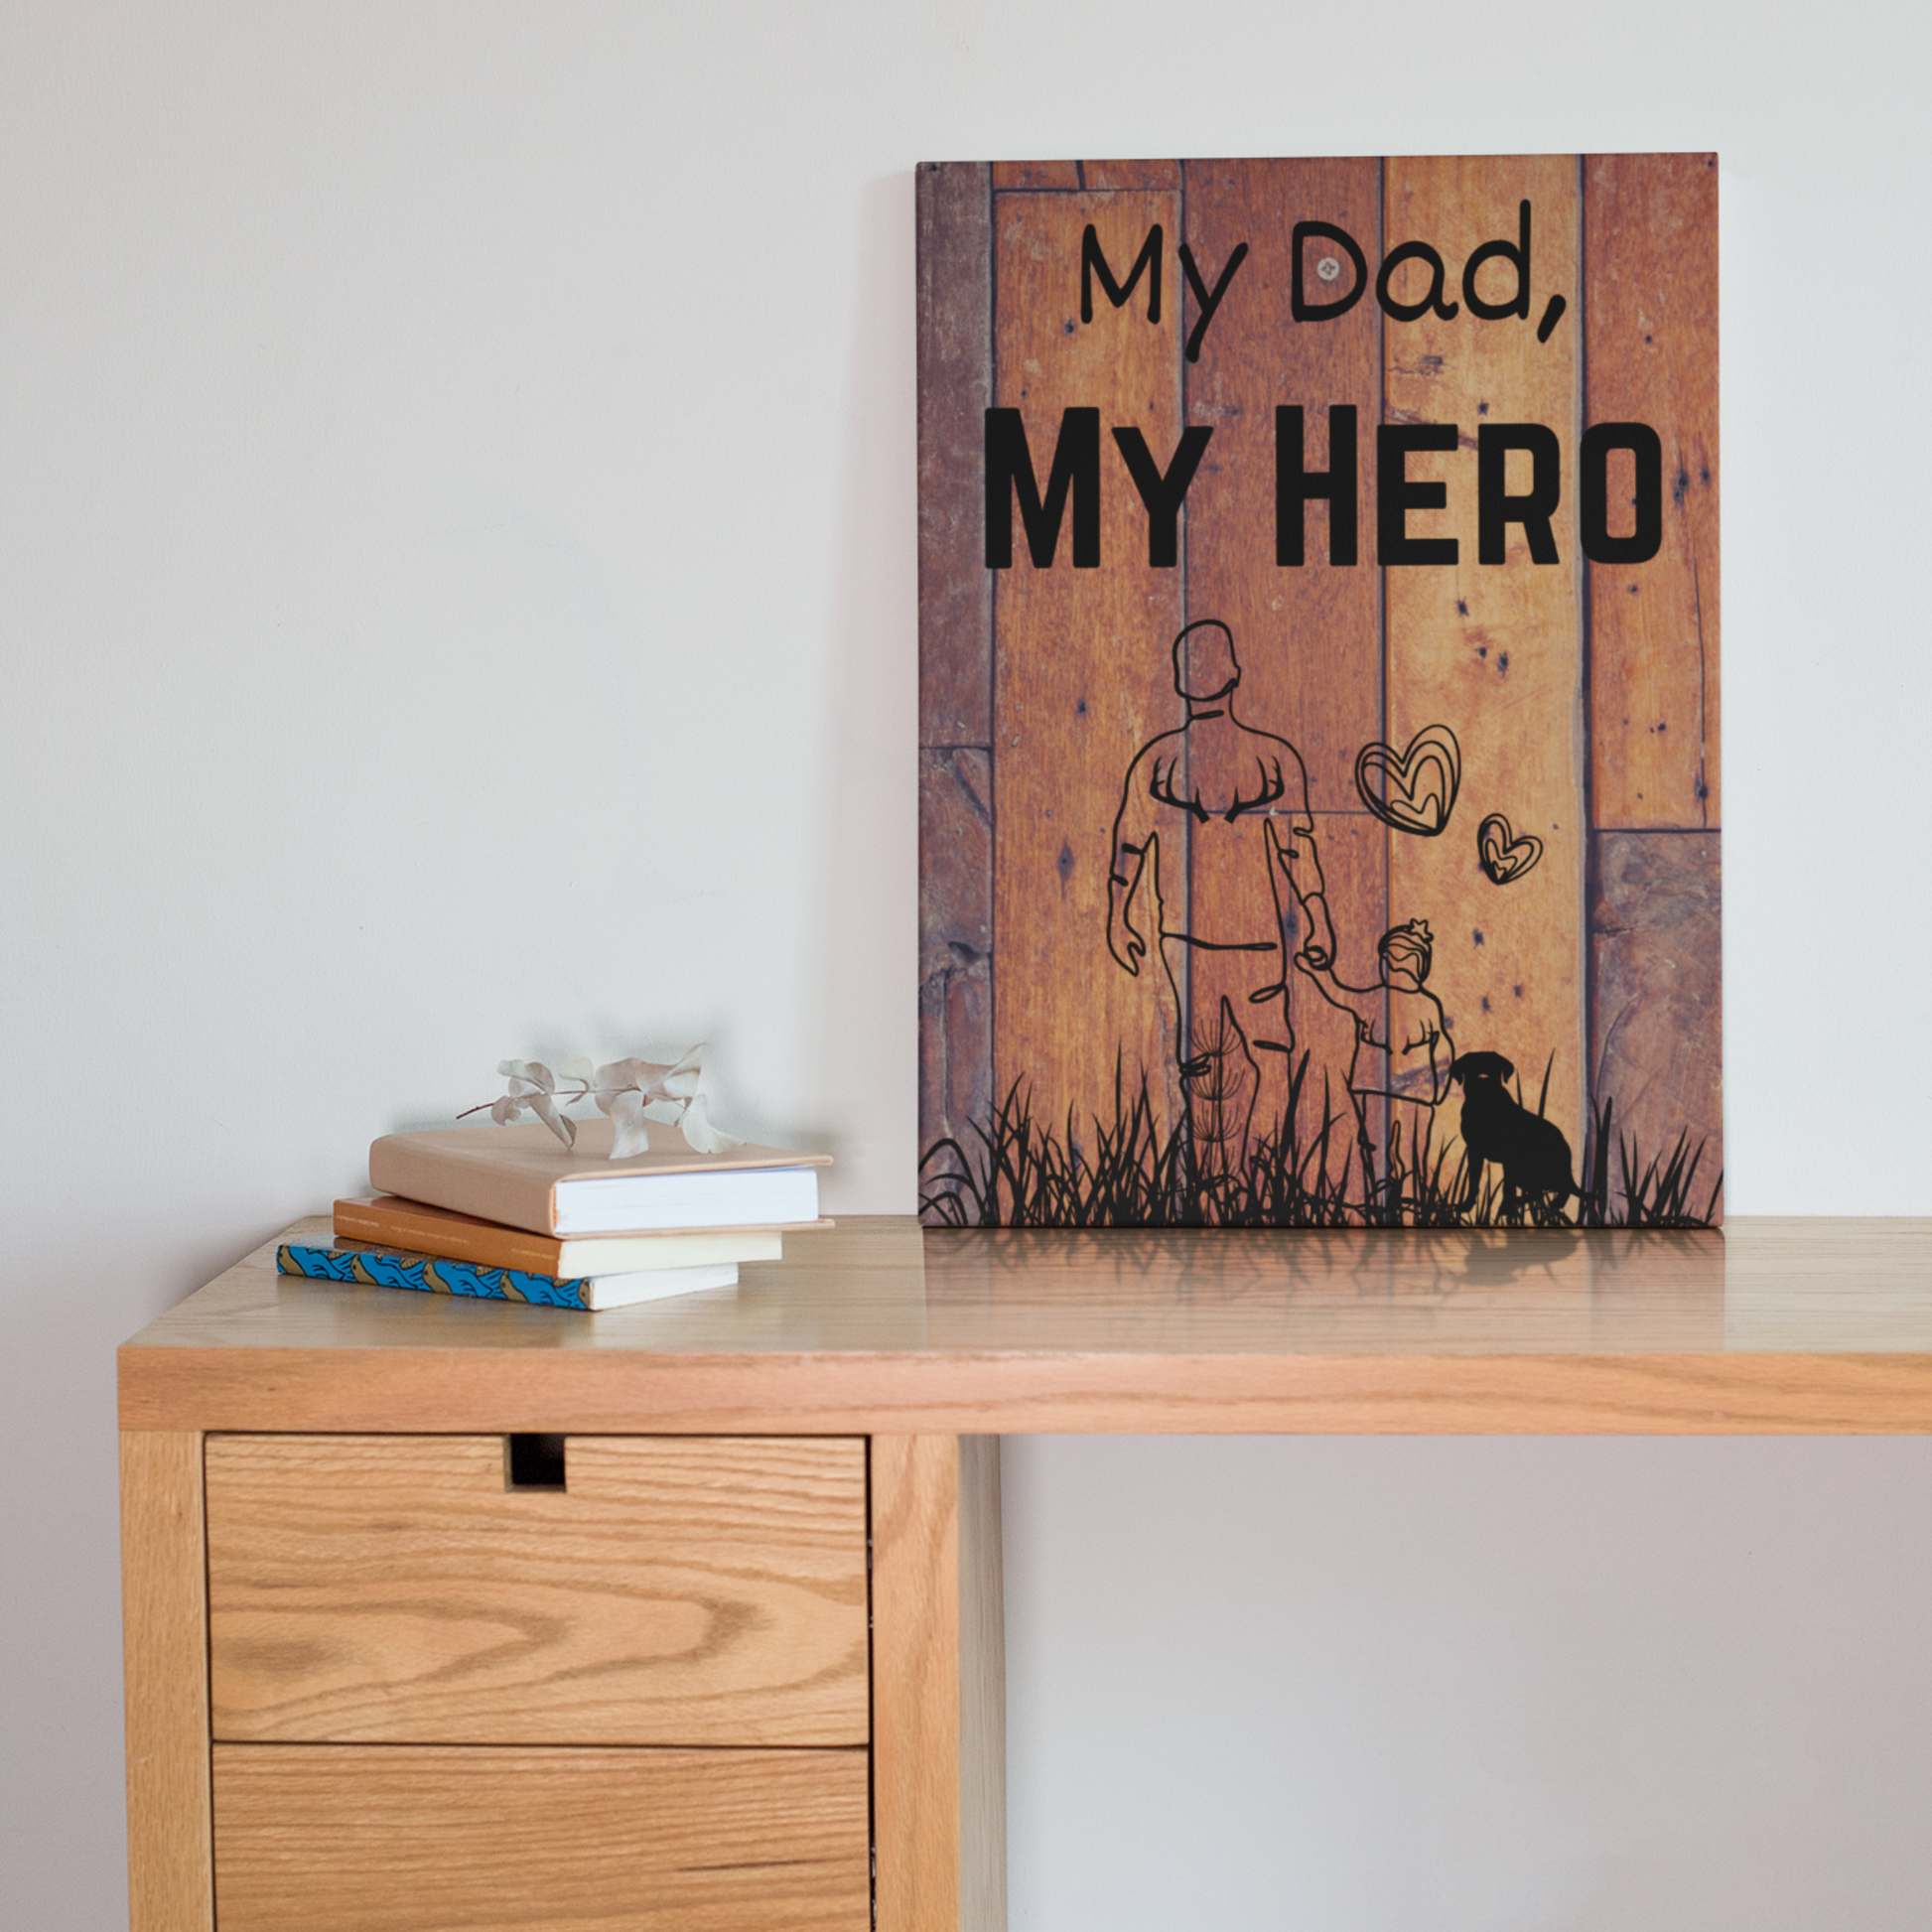 My Dad, My Hero Wall Decor with Dog, front view.